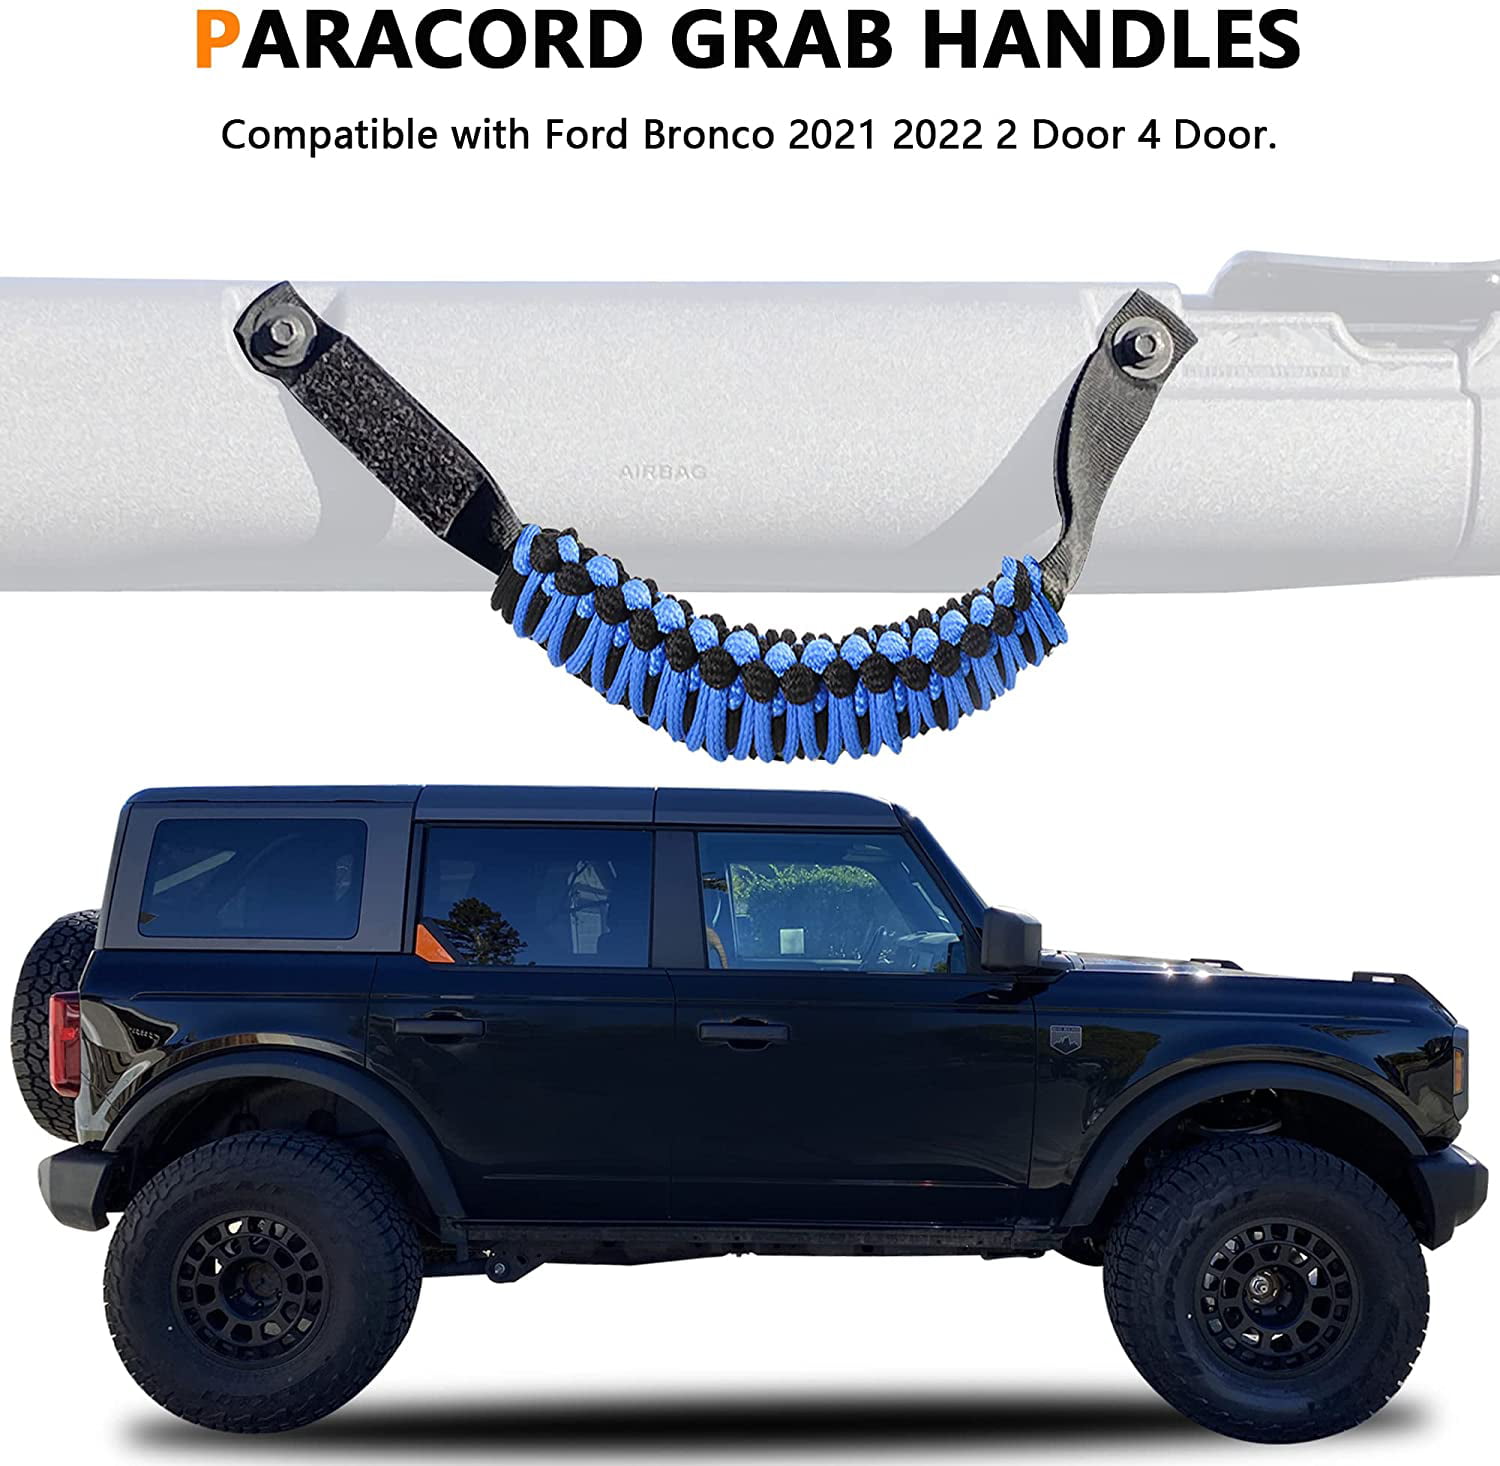 Paracord Grip Handle for Ford Bronco Accessories CHETO Roll Bar Grab Handles for 2021 2022 Ford Bronco 2/4 Doors with America Flag（2 Black） 